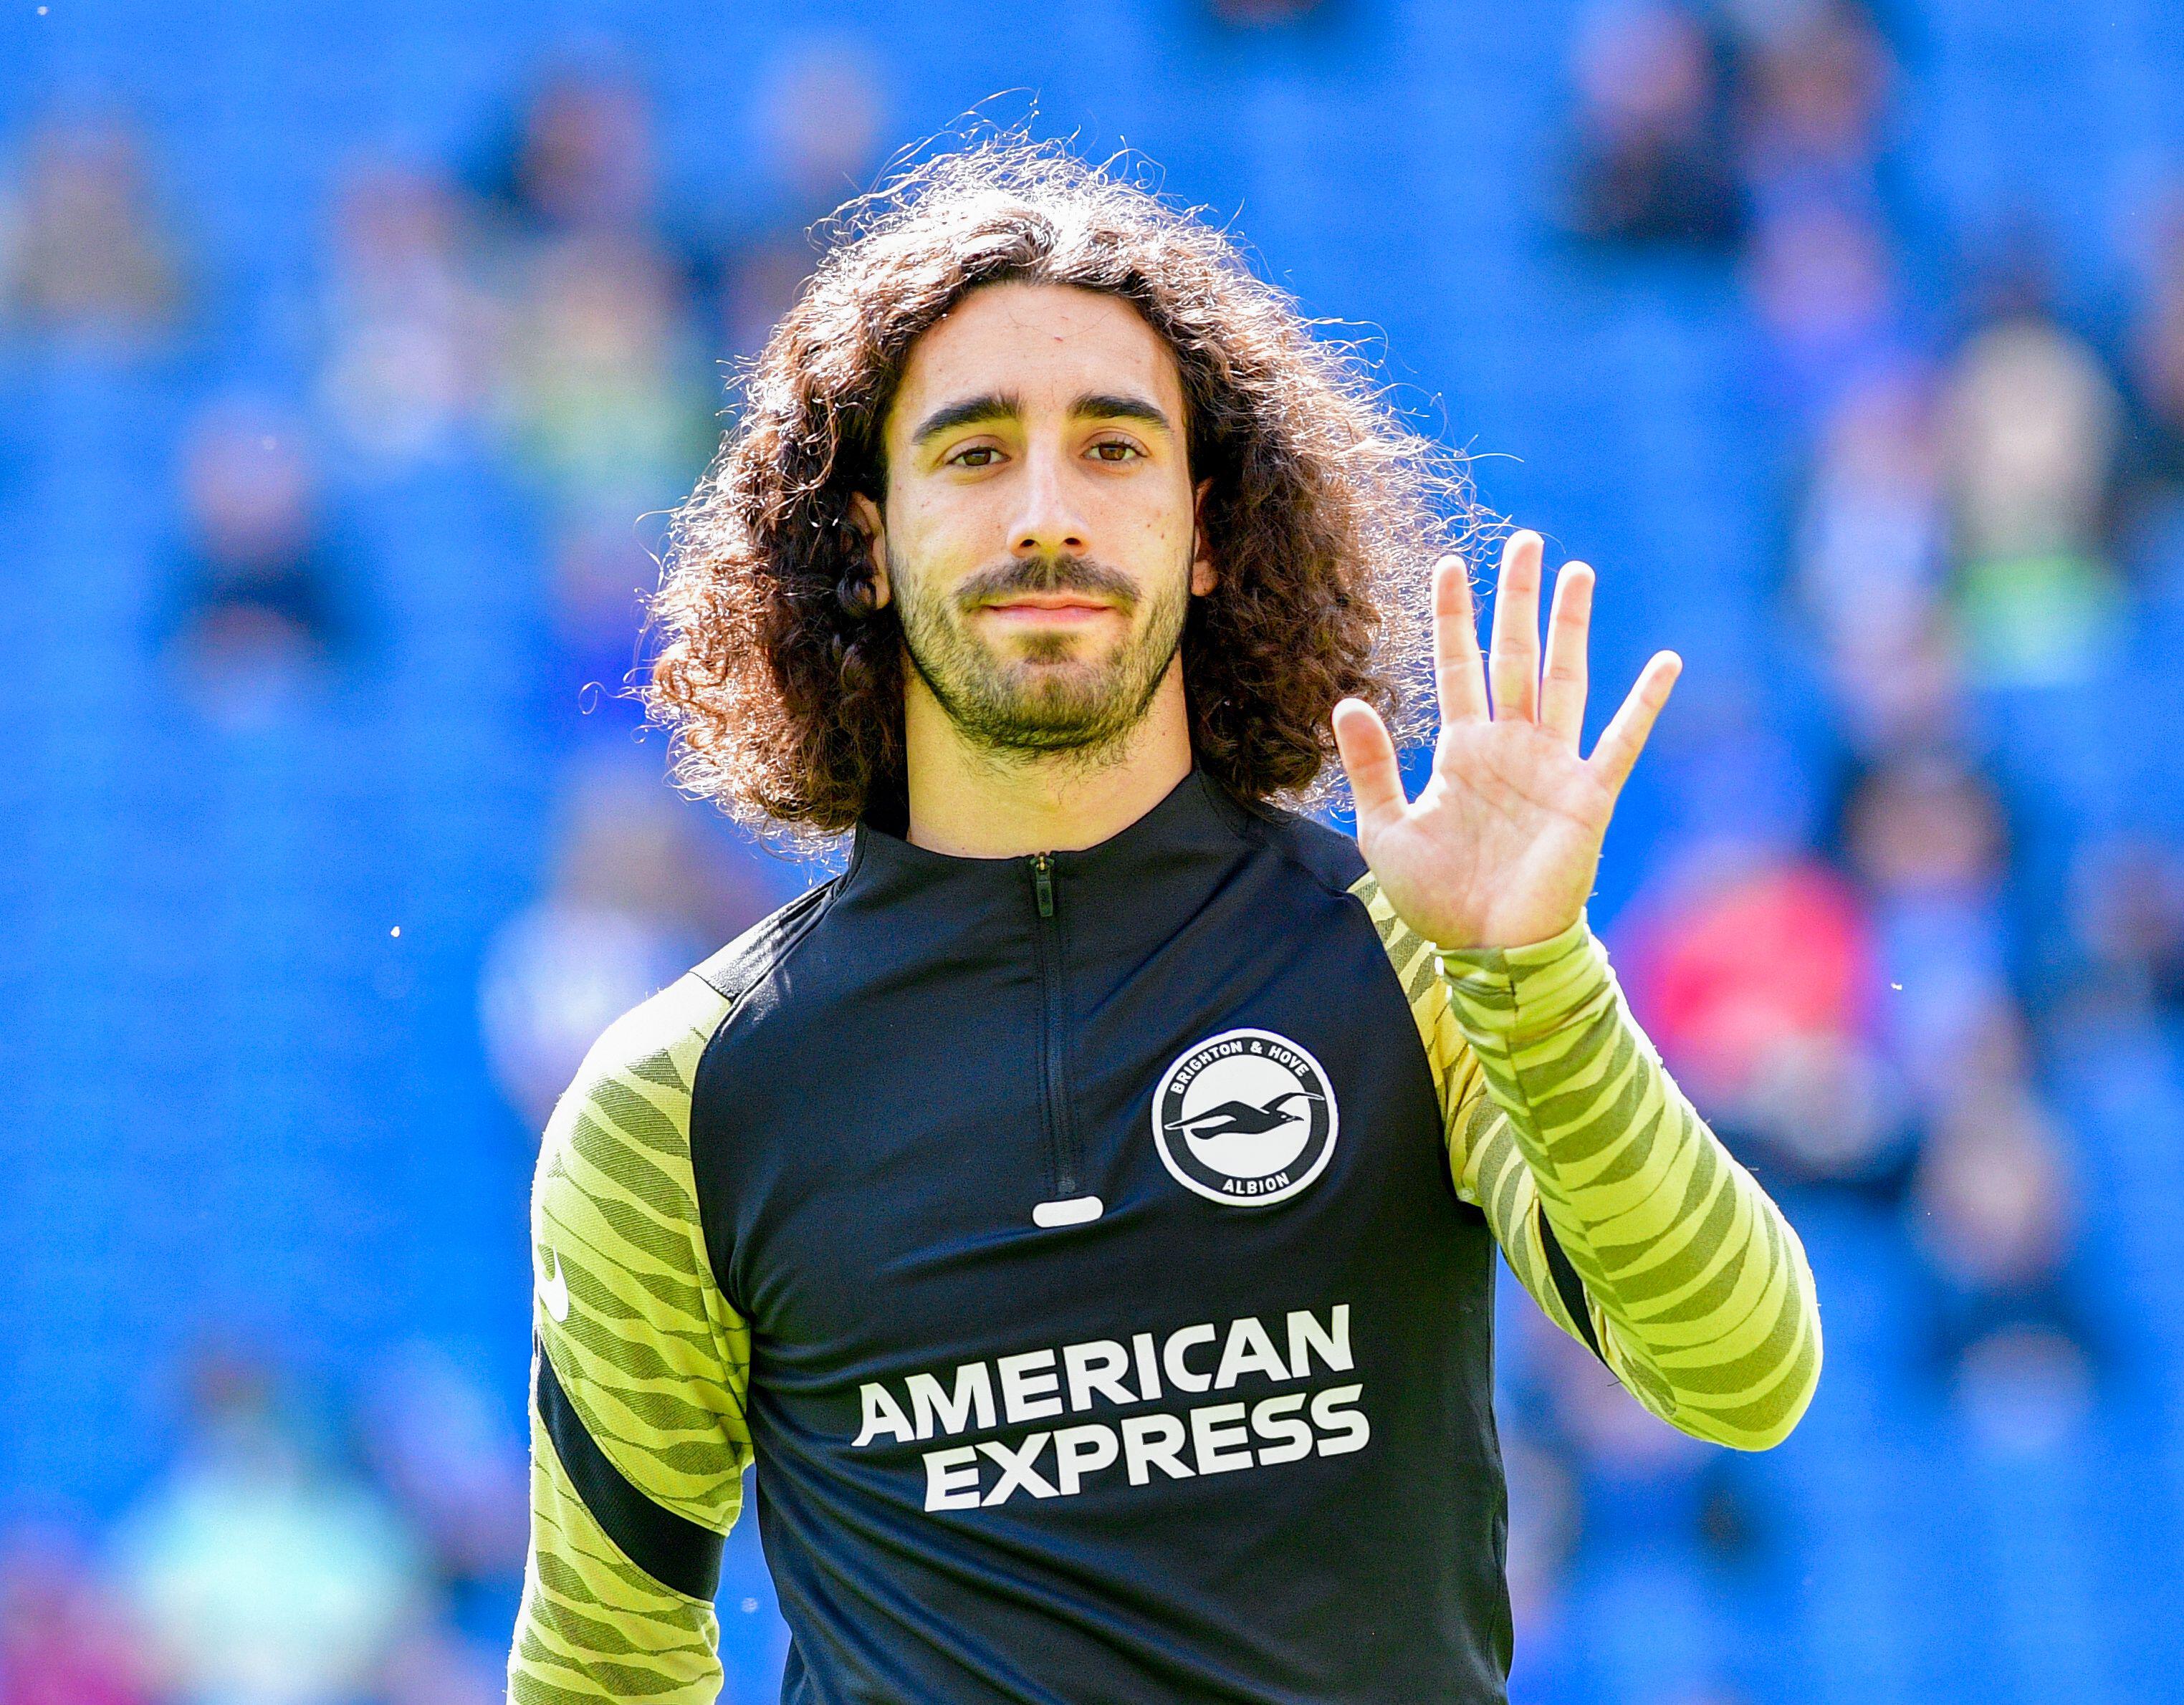 Chelsea confirm that they have signed Marc Cucurella for reported £63 million fee